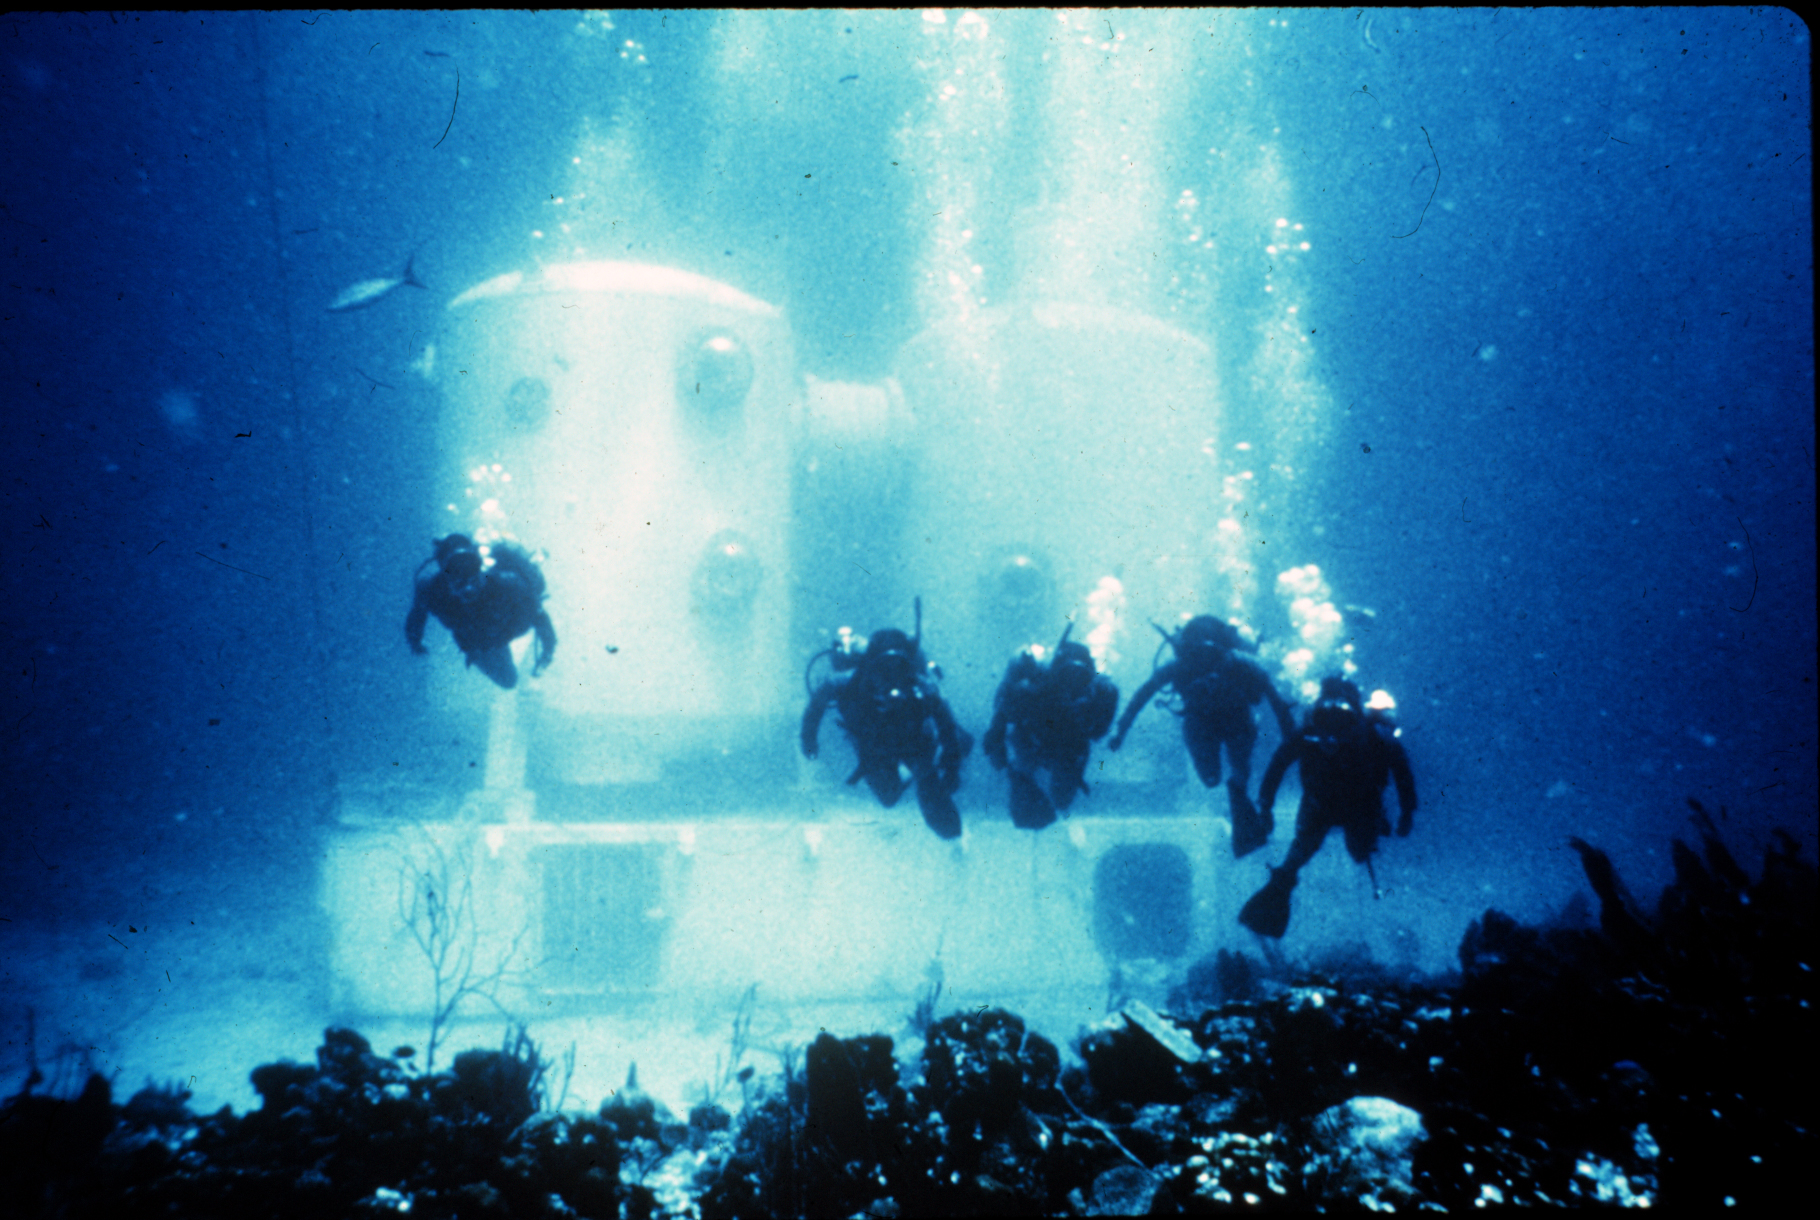 Caption: Aquanauts exit Tektite I in 1969. The Tektite program was the first nationally sponsored effort to place scientists in the sea to live. The program will be one of the subjects discussed during the first episode of Classroom Under the Sea on Thursday, Oct. 9 at 1 p.m. EDT. Viewers can watch at roanestate.edu/classroomunderthesea or on youtube.com/classroomunderthesea. Photograph courtesy of the National Oceanic and Atmospheric Administration/Department of Commerce.